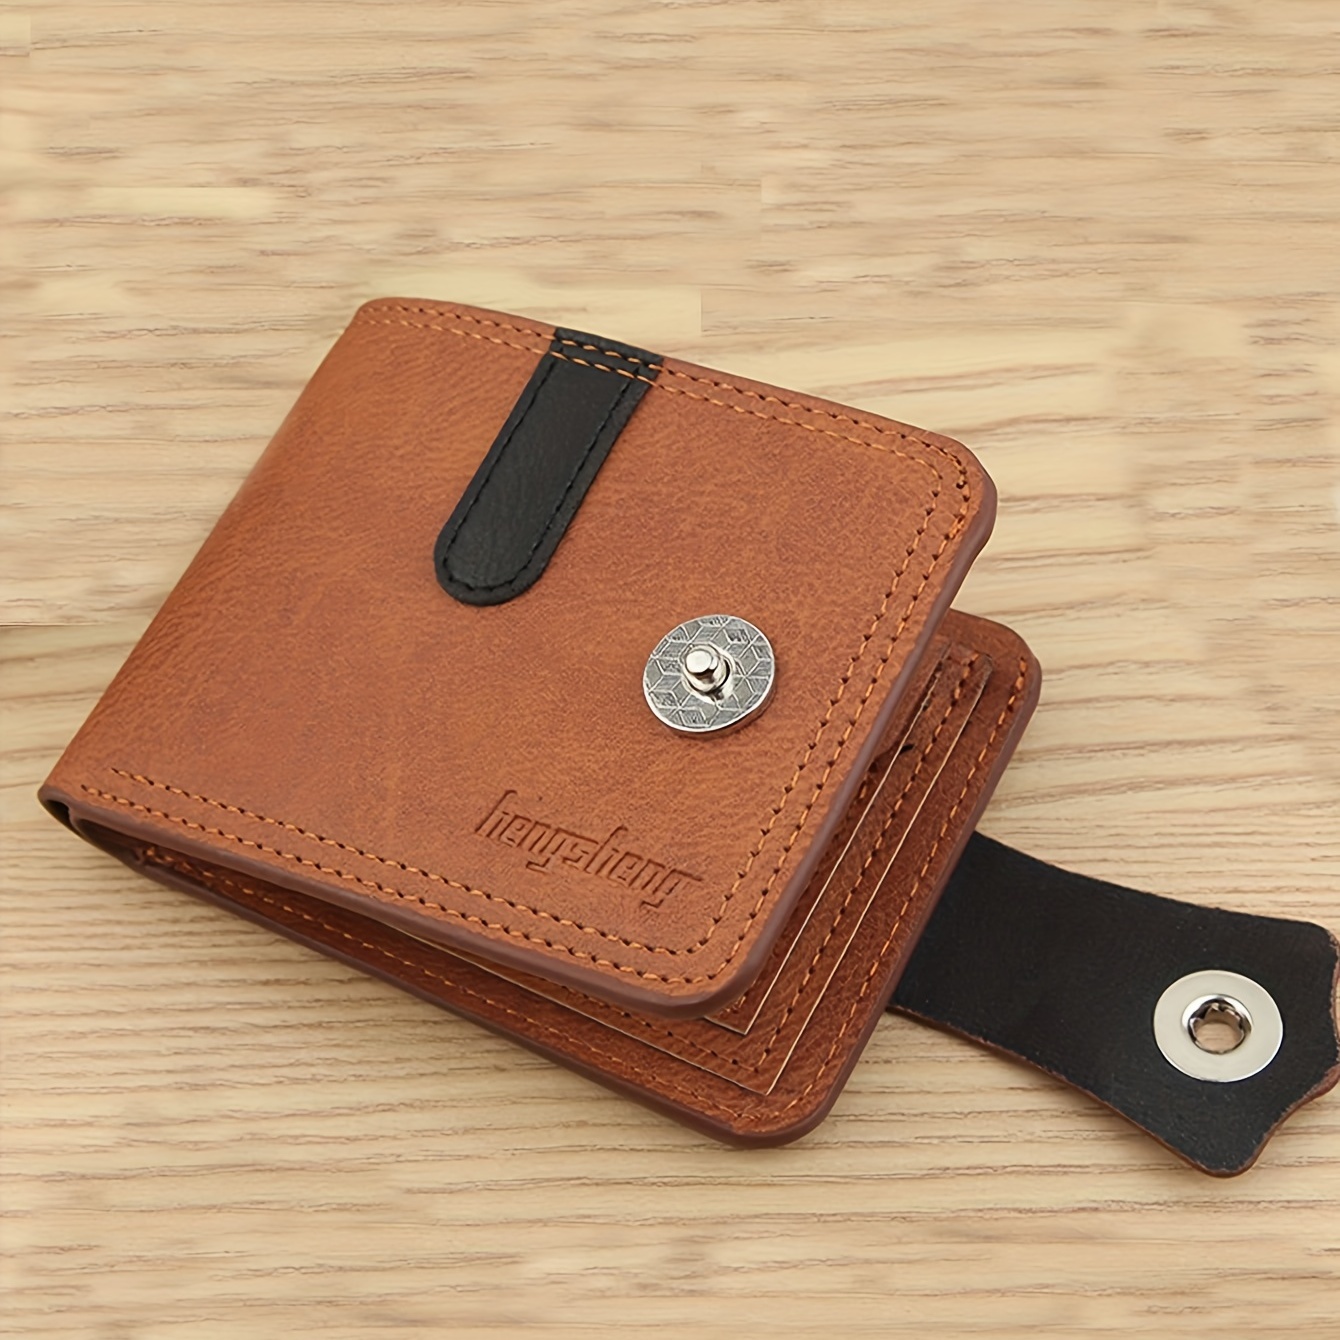 Leather Wallet for Men, Bifold Wallet with Snap Button Closure, Leather Purse for Him, Coin Wallet